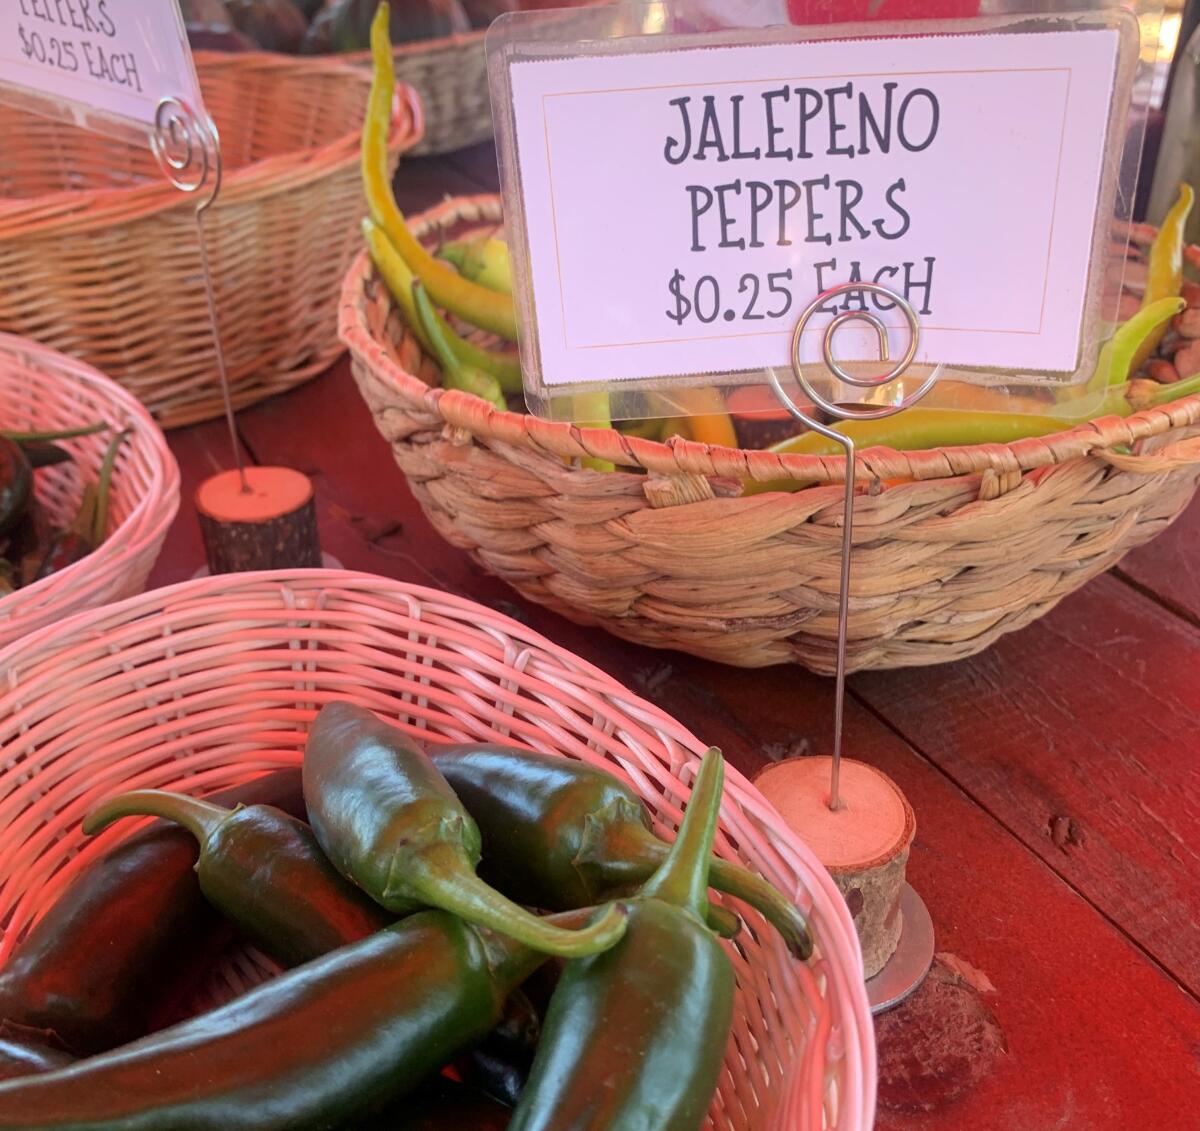 Jalapeno peppers in baskets for sale at a farm stand